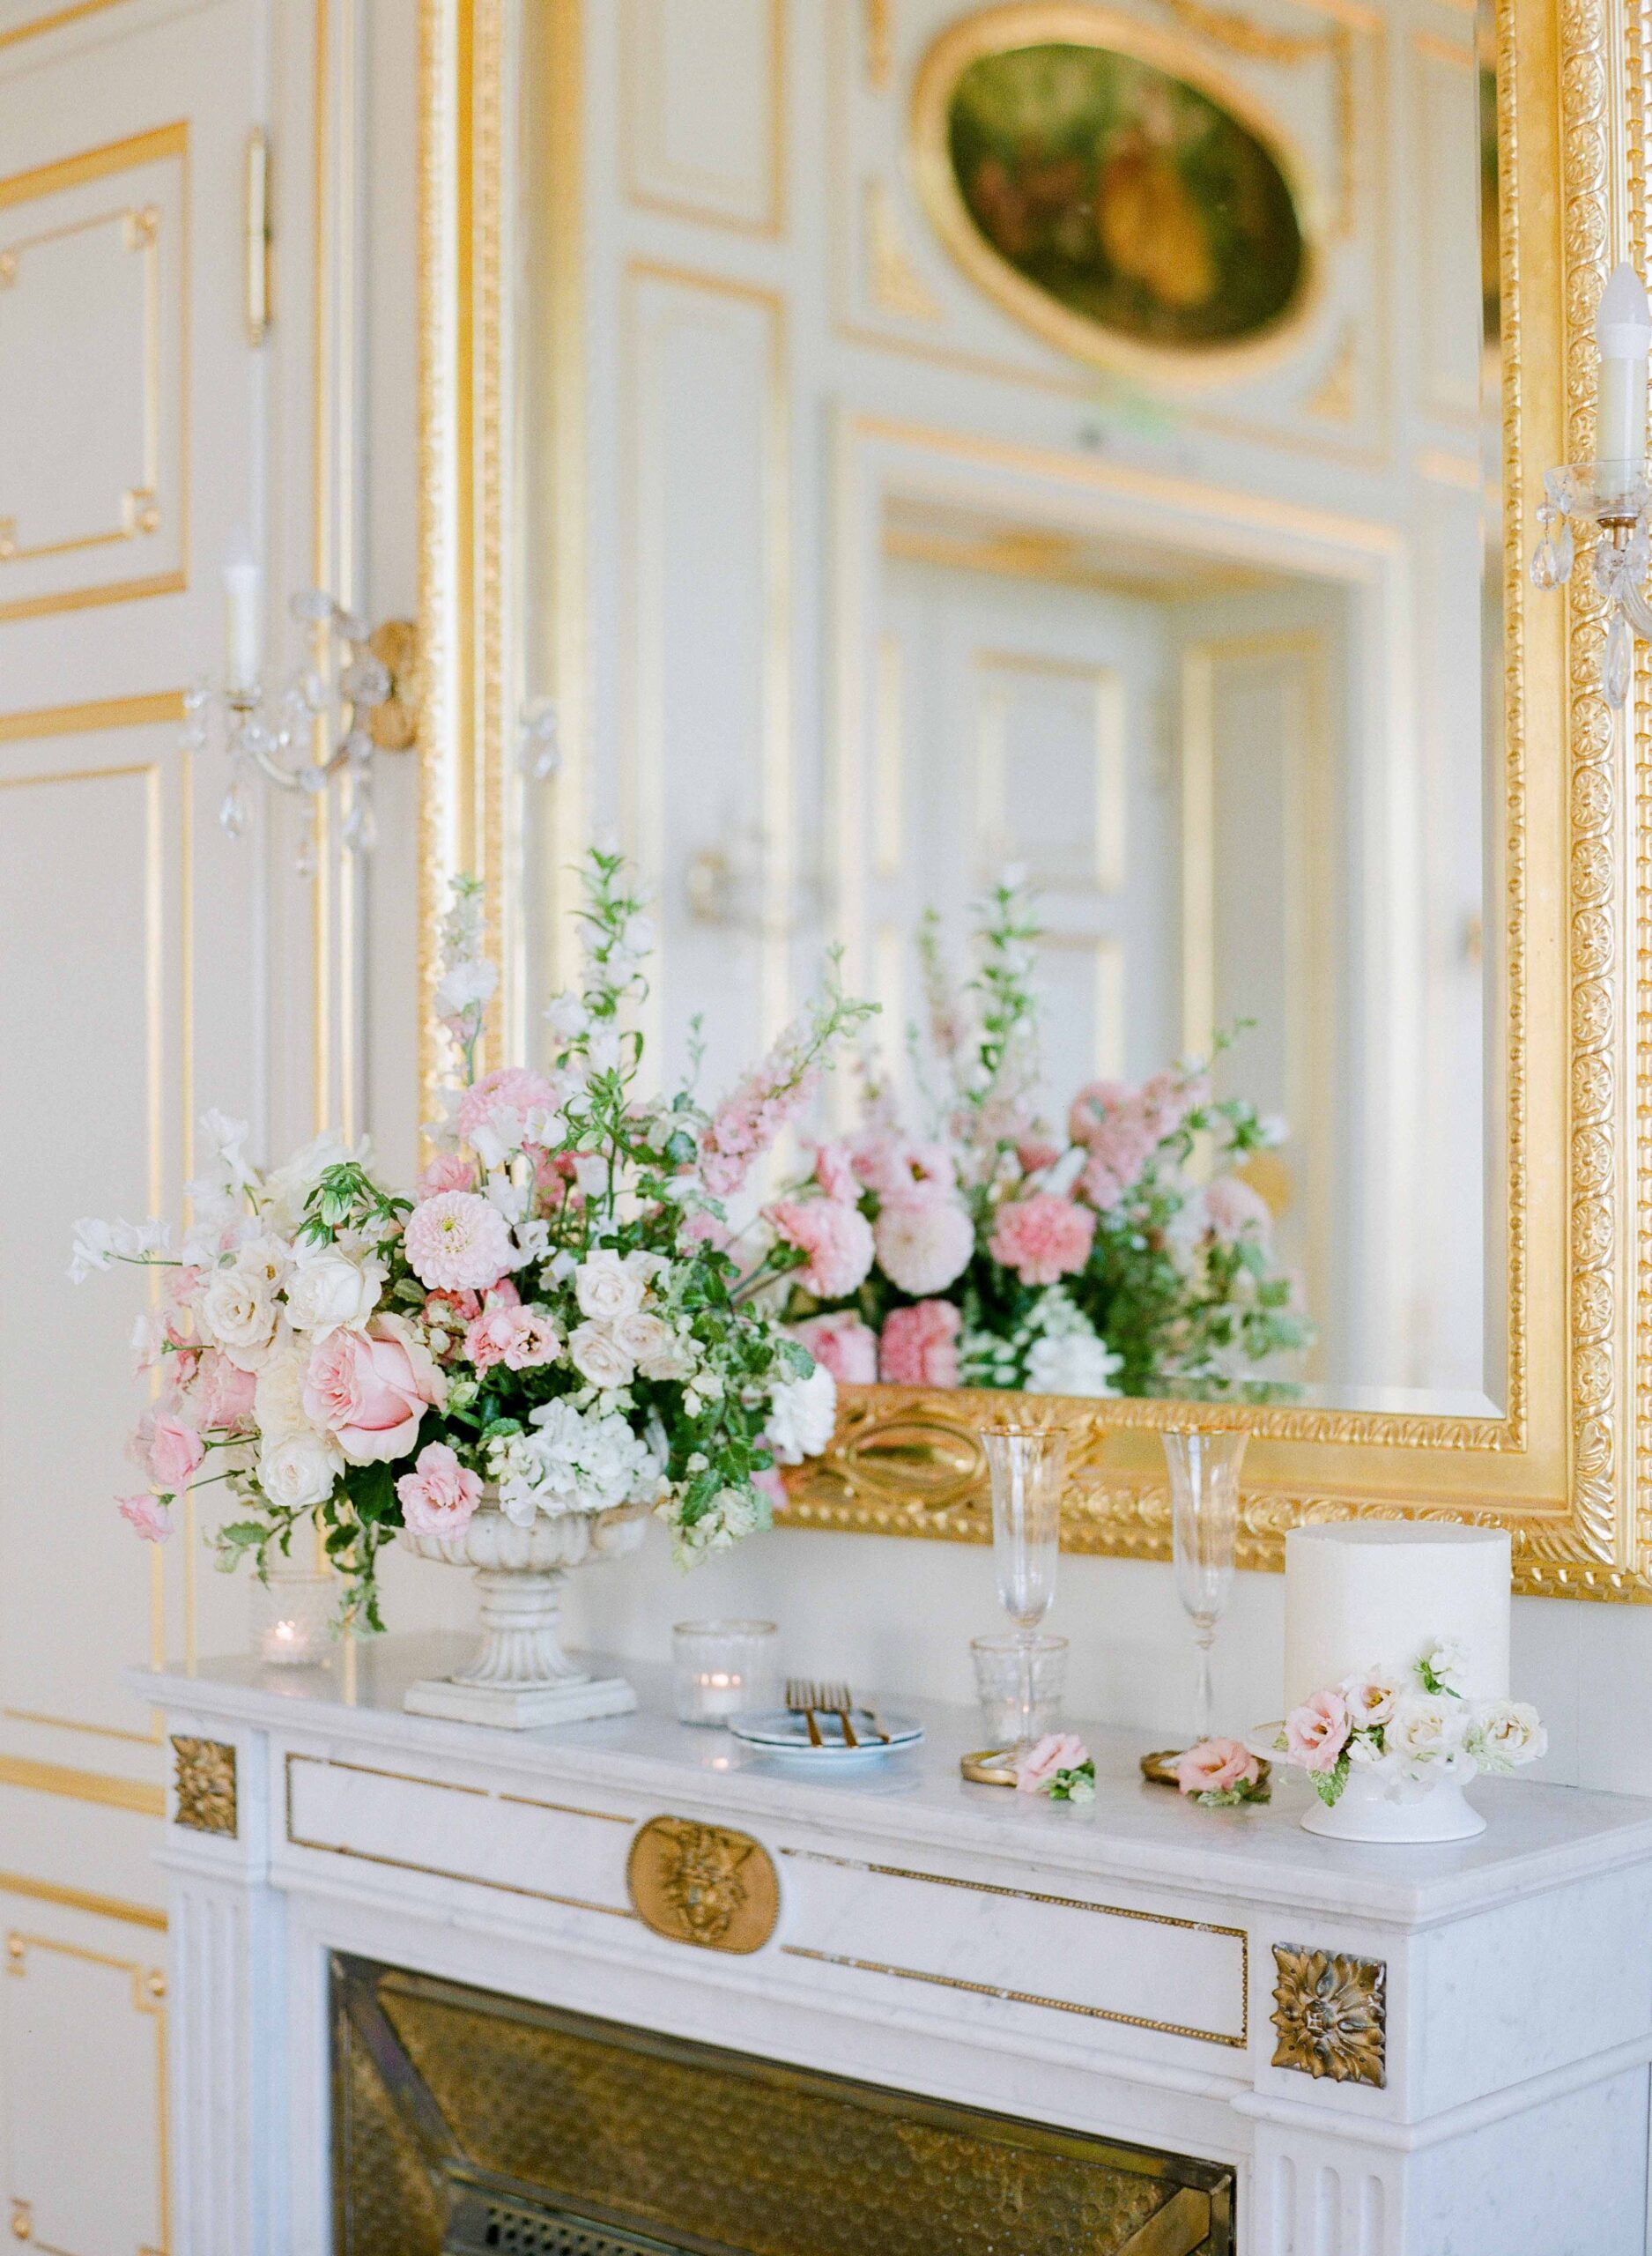 Chateau Saint Georges Wedding Photographer | Grasse | French Riviera | Molly Carr Photography